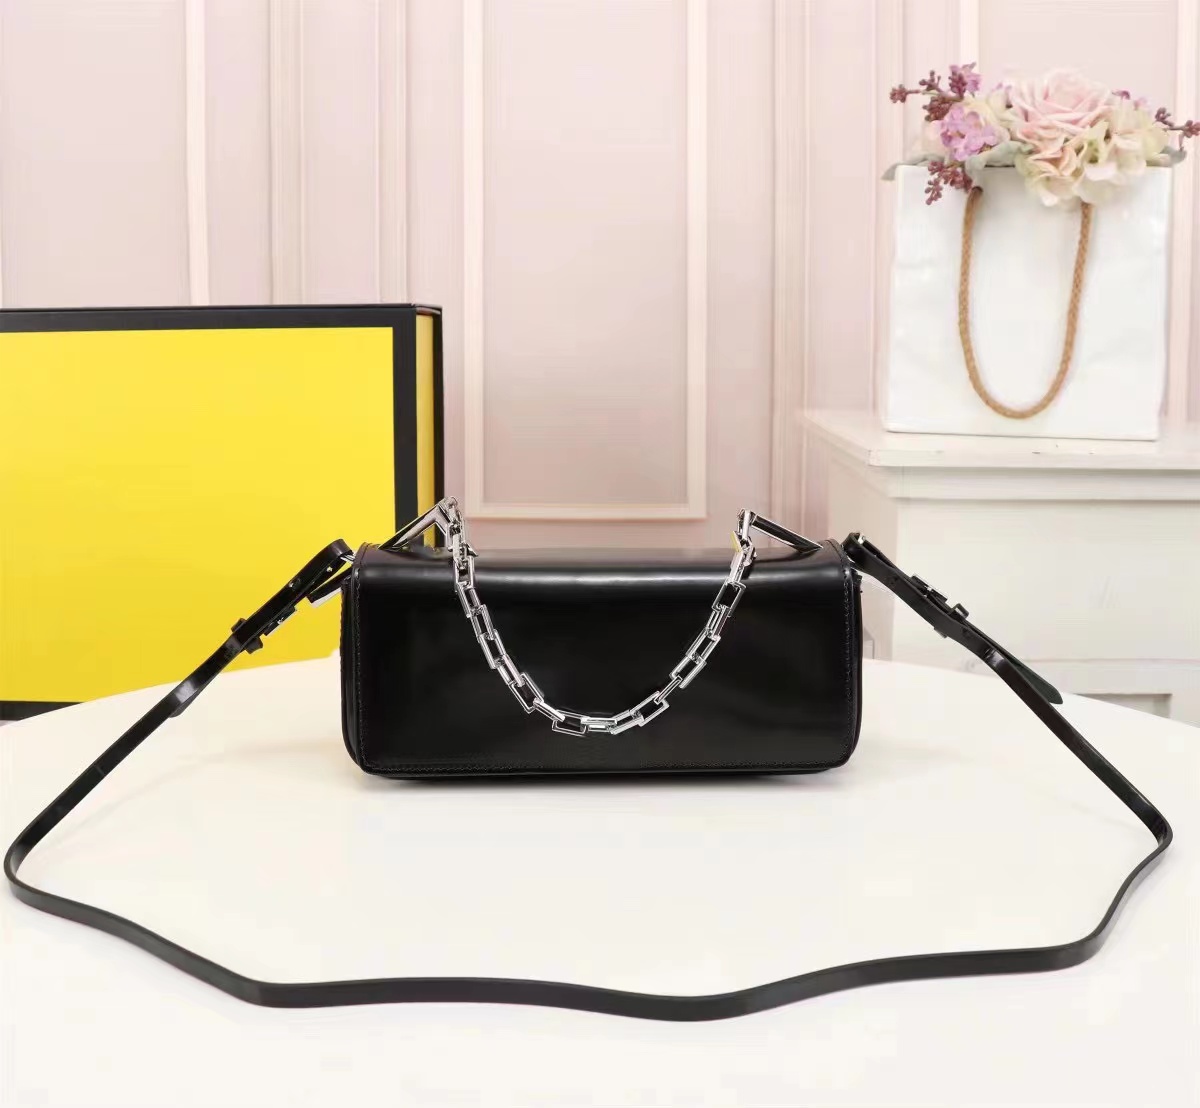 

Luxurys Designers Clutch large Shopping Bags Handheld bag accessories and chains are equipped with handbags, mirrors, short chain handles, and can be held by hand bags, Pink